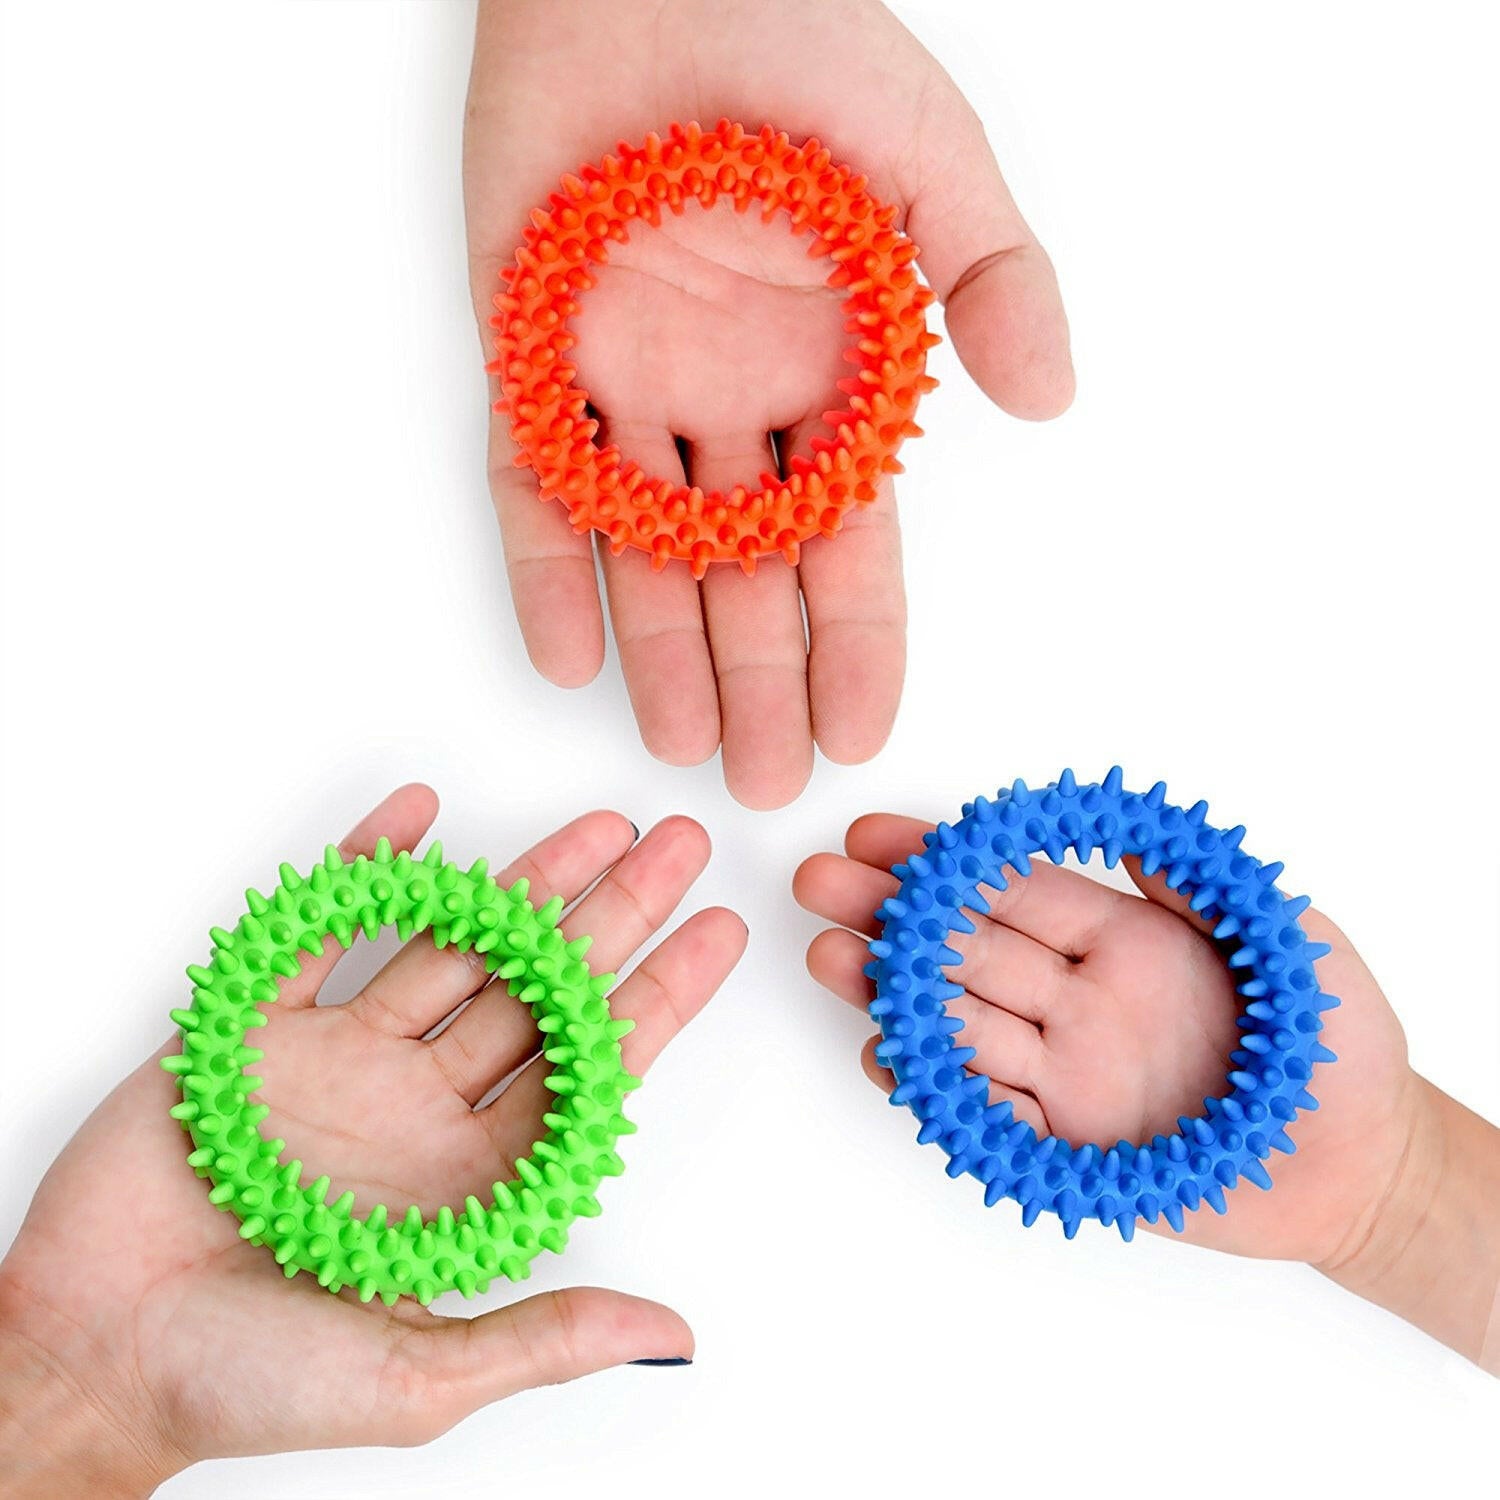 Pet Supplies : Mutty Dog Chew Ring - Made in USA Dog Toys for Chewers - One  Meal Donated to Shelters per Toy - Durable Rubber Dog Toy - Non-Toxic 100%  Food Grade Materials : Amazon.com